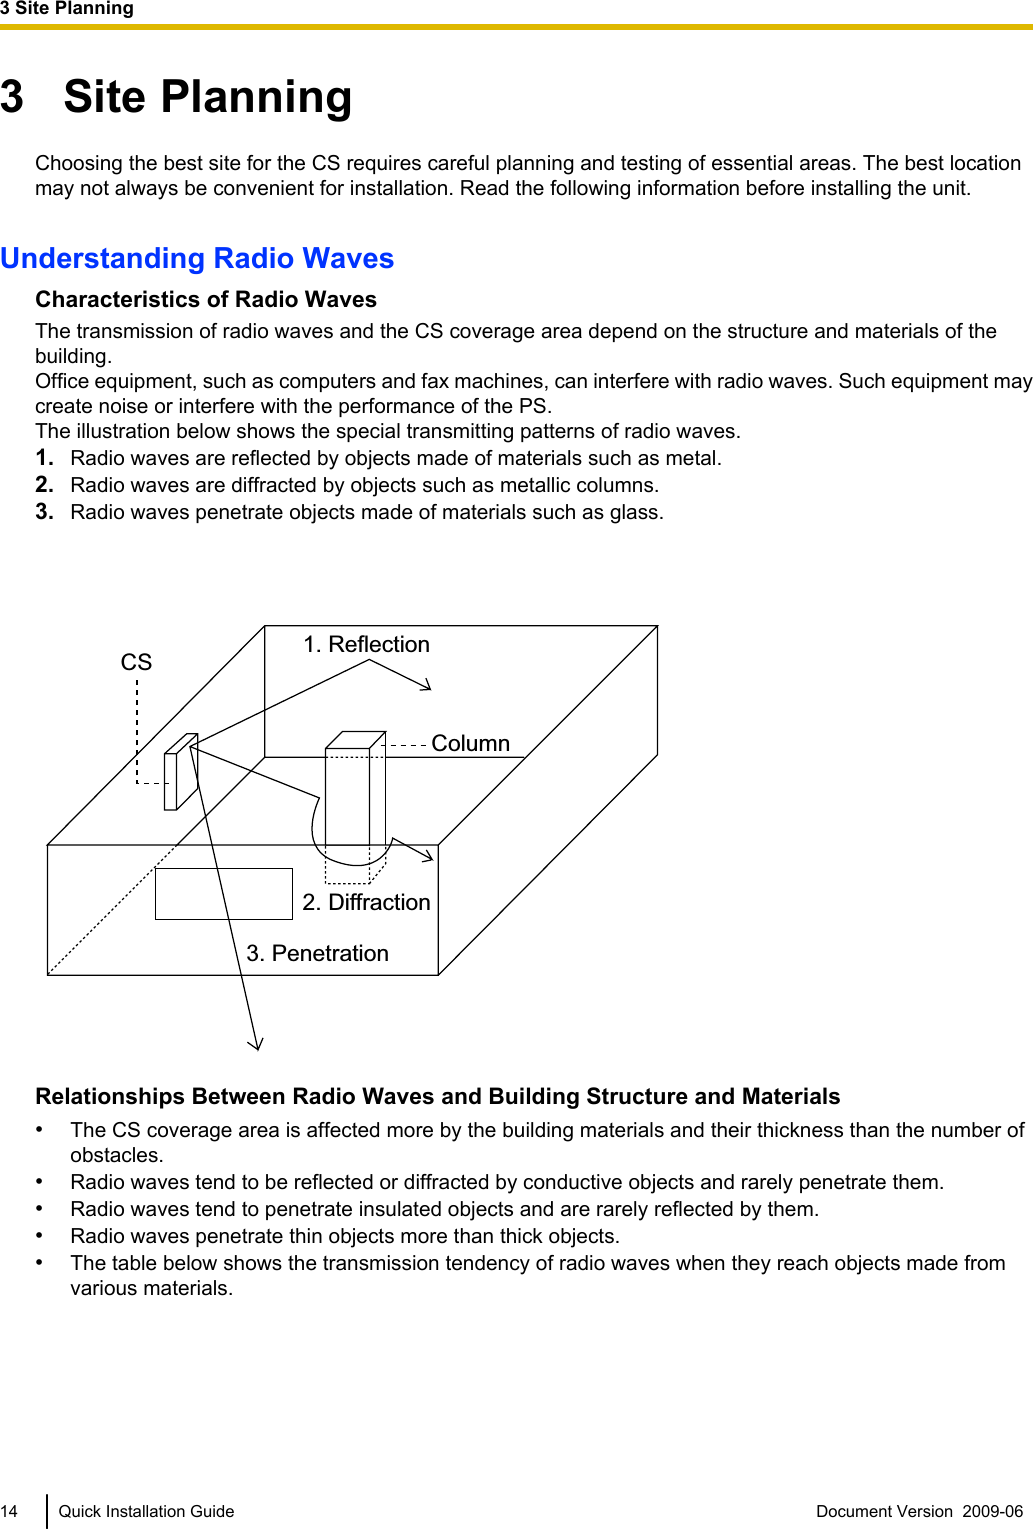 3   Site PlanningChoosing the best site for the CS requires careful planning and testing of essential areas. The best locationmay not always be convenient for installation. Read the following information before installing the unit.Understanding Radio WavesCharacteristics of Radio WavesThe transmission of radio waves and the CS coverage area depend on the structure and materials of thebuilding.Office equipment, such as computers and fax machines, can interfere with radio waves. Such equipment maycreate noise or interfere with the performance of the PS.The illustration below shows the special transmitting patterns of radio waves.1. Radio waves are reflected by objects made of materials such as metal.2. Radio waves are diffracted by objects such as metallic columns.3. Radio waves penetrate objects made of materials such as glass.CSColumn3. Penetration2. Diffraction1. ReflectionRelationships Between Radio Waves and Building Structure and Materials•The CS coverage area is affected more by the building materials and their thickness than the number ofobstacles.•Radio waves tend to be reflected or diffracted by conductive objects and rarely penetrate them.•Radio waves tend to penetrate insulated objects and are rarely reflected by them.•Radio waves penetrate thin objects more than thick objects.•The table below shows the transmission tendency of radio waves when they reach objects made fromvarious materials.14 Quick Installation Guide Document Version  2009-06  3 Site Planning